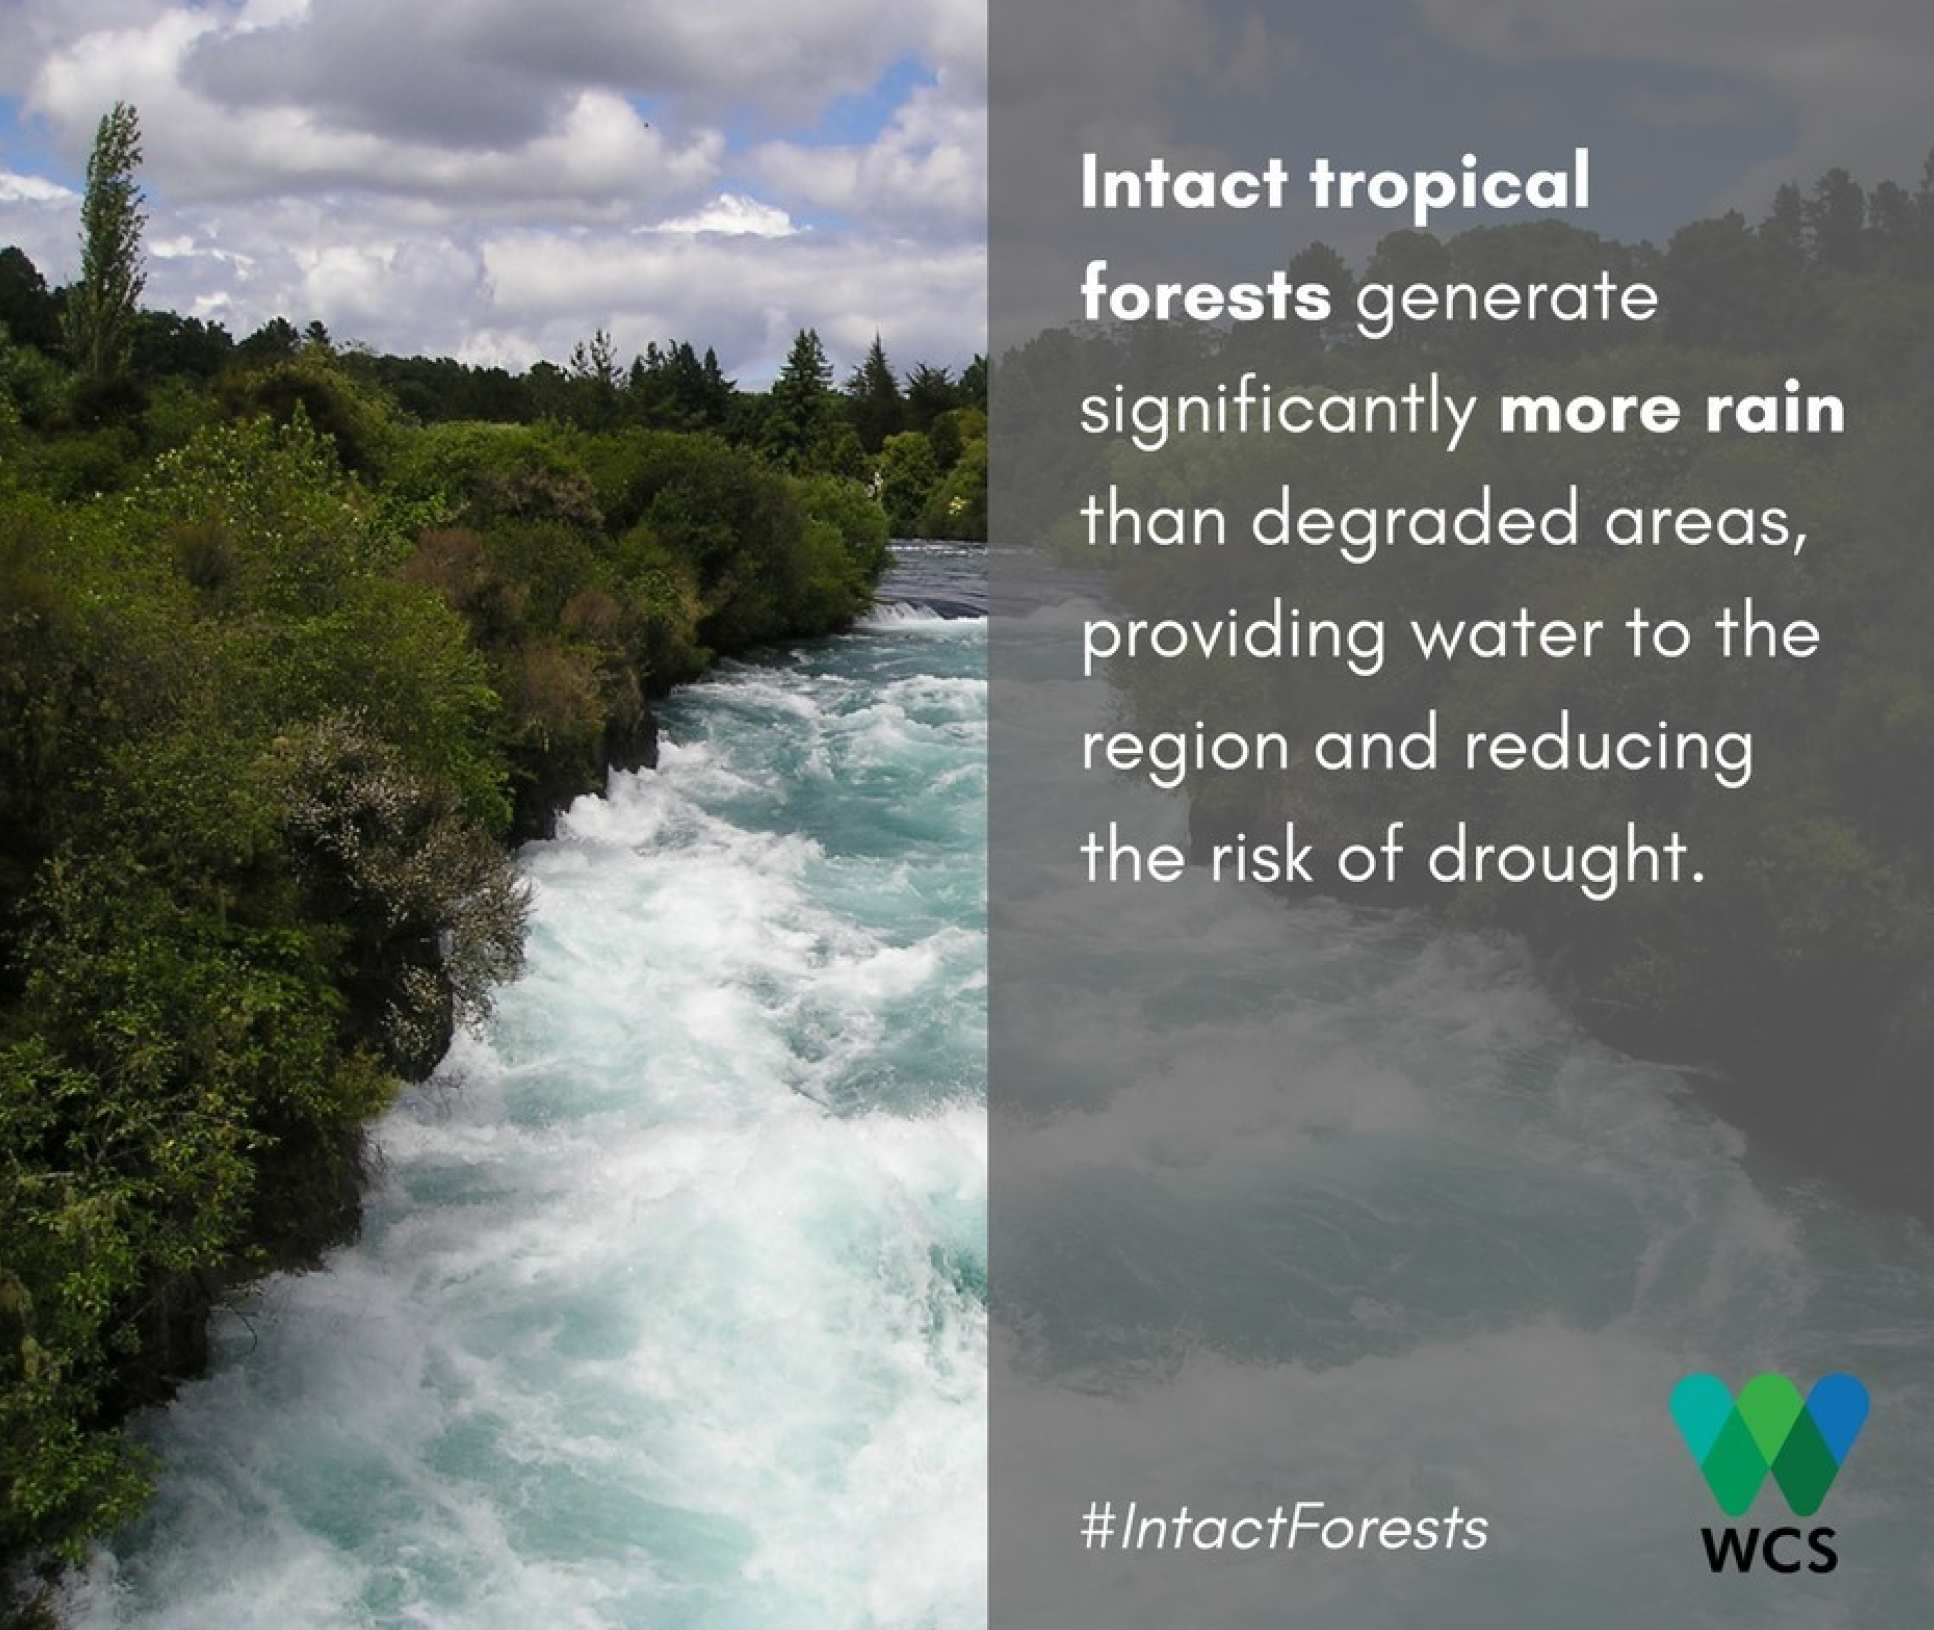 Image of a forest river with the caption: Intact tropical forests generate significantly more rain than degraded areas, providing water to the region and reducing the risk of drought.